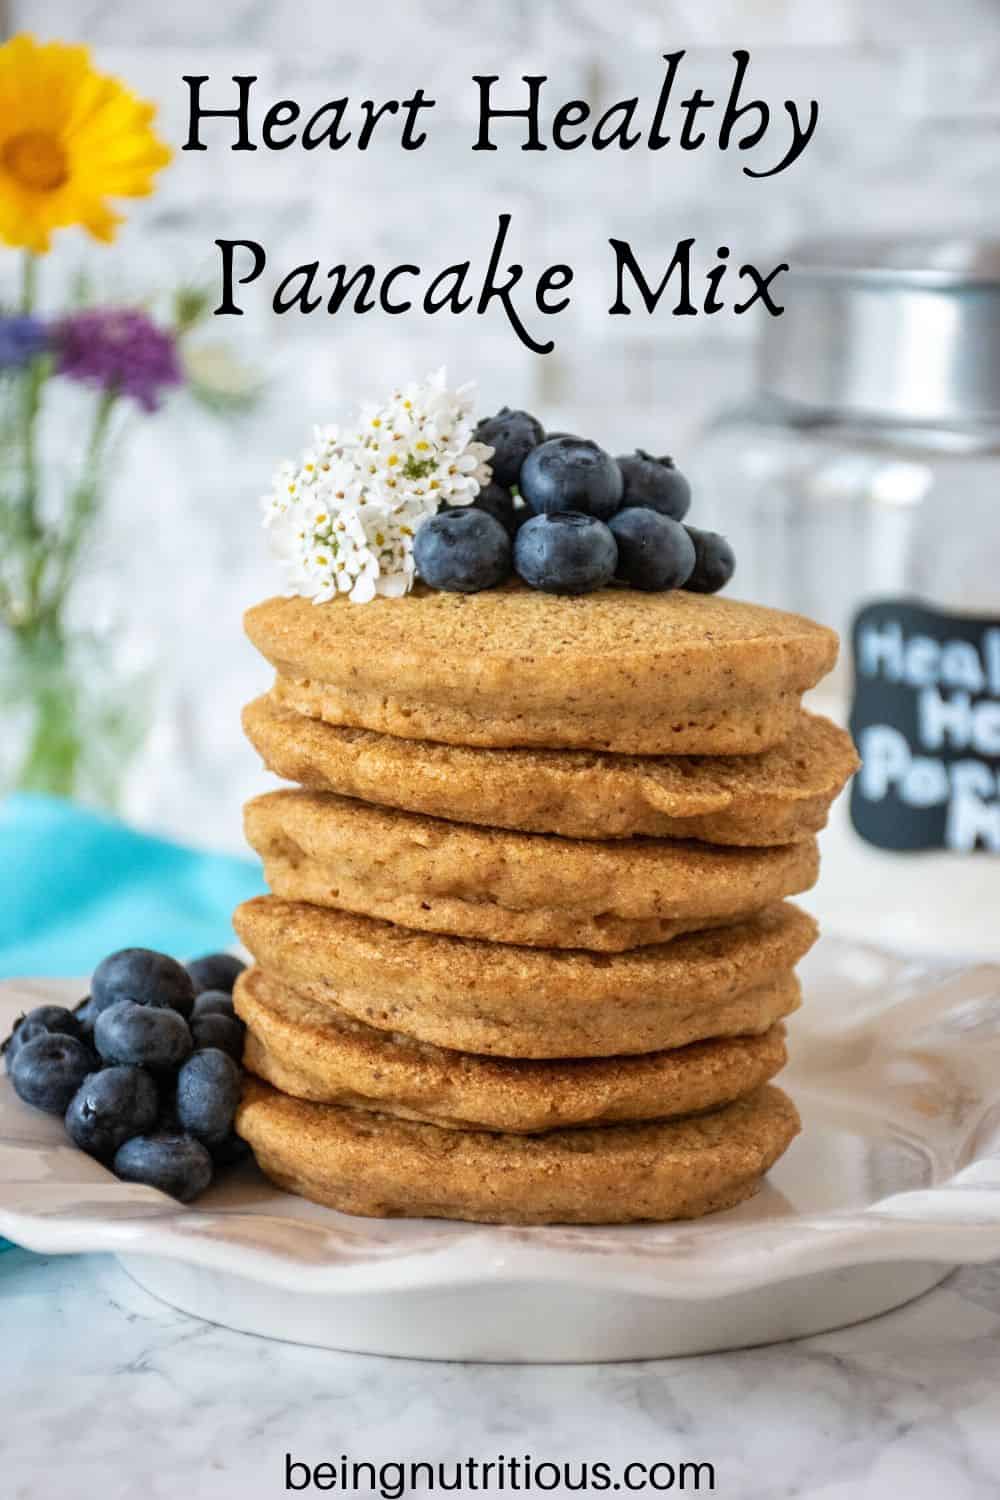 Stack of 6 whole wheat pancakes, with a pile of fresh blueberries and white flowers on top.